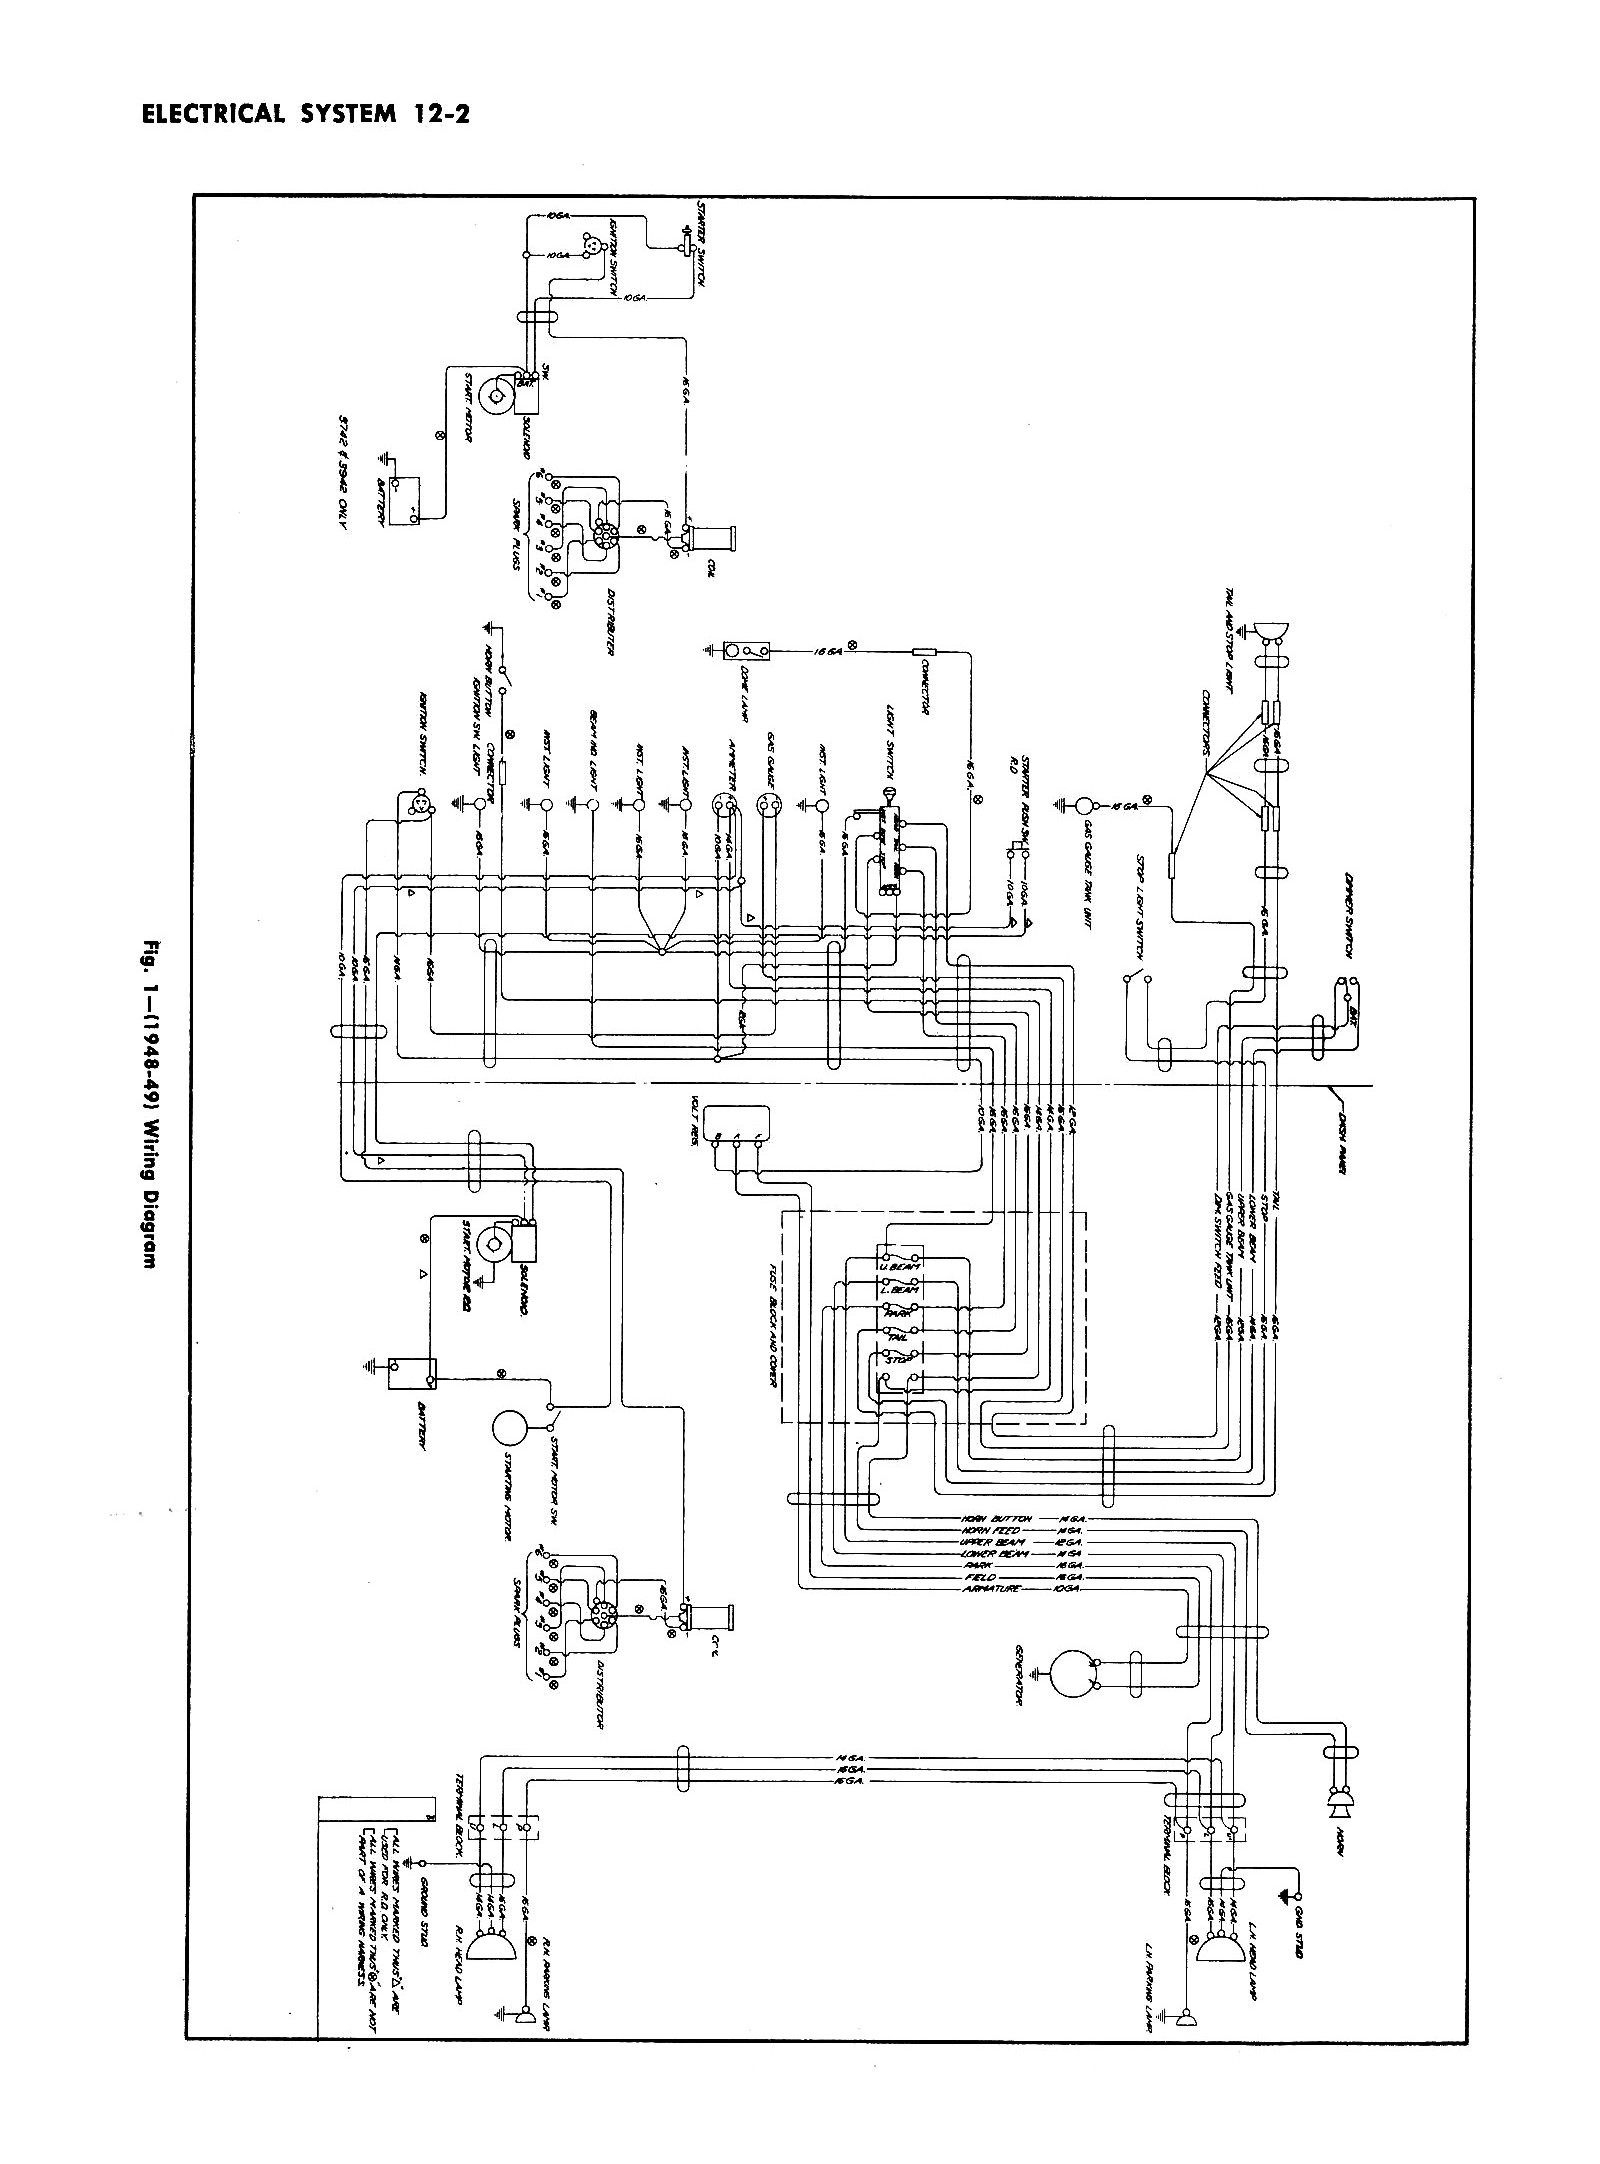 Chevy Wiring Diagrams - Chevy Headlight Switch Wiring Diagram